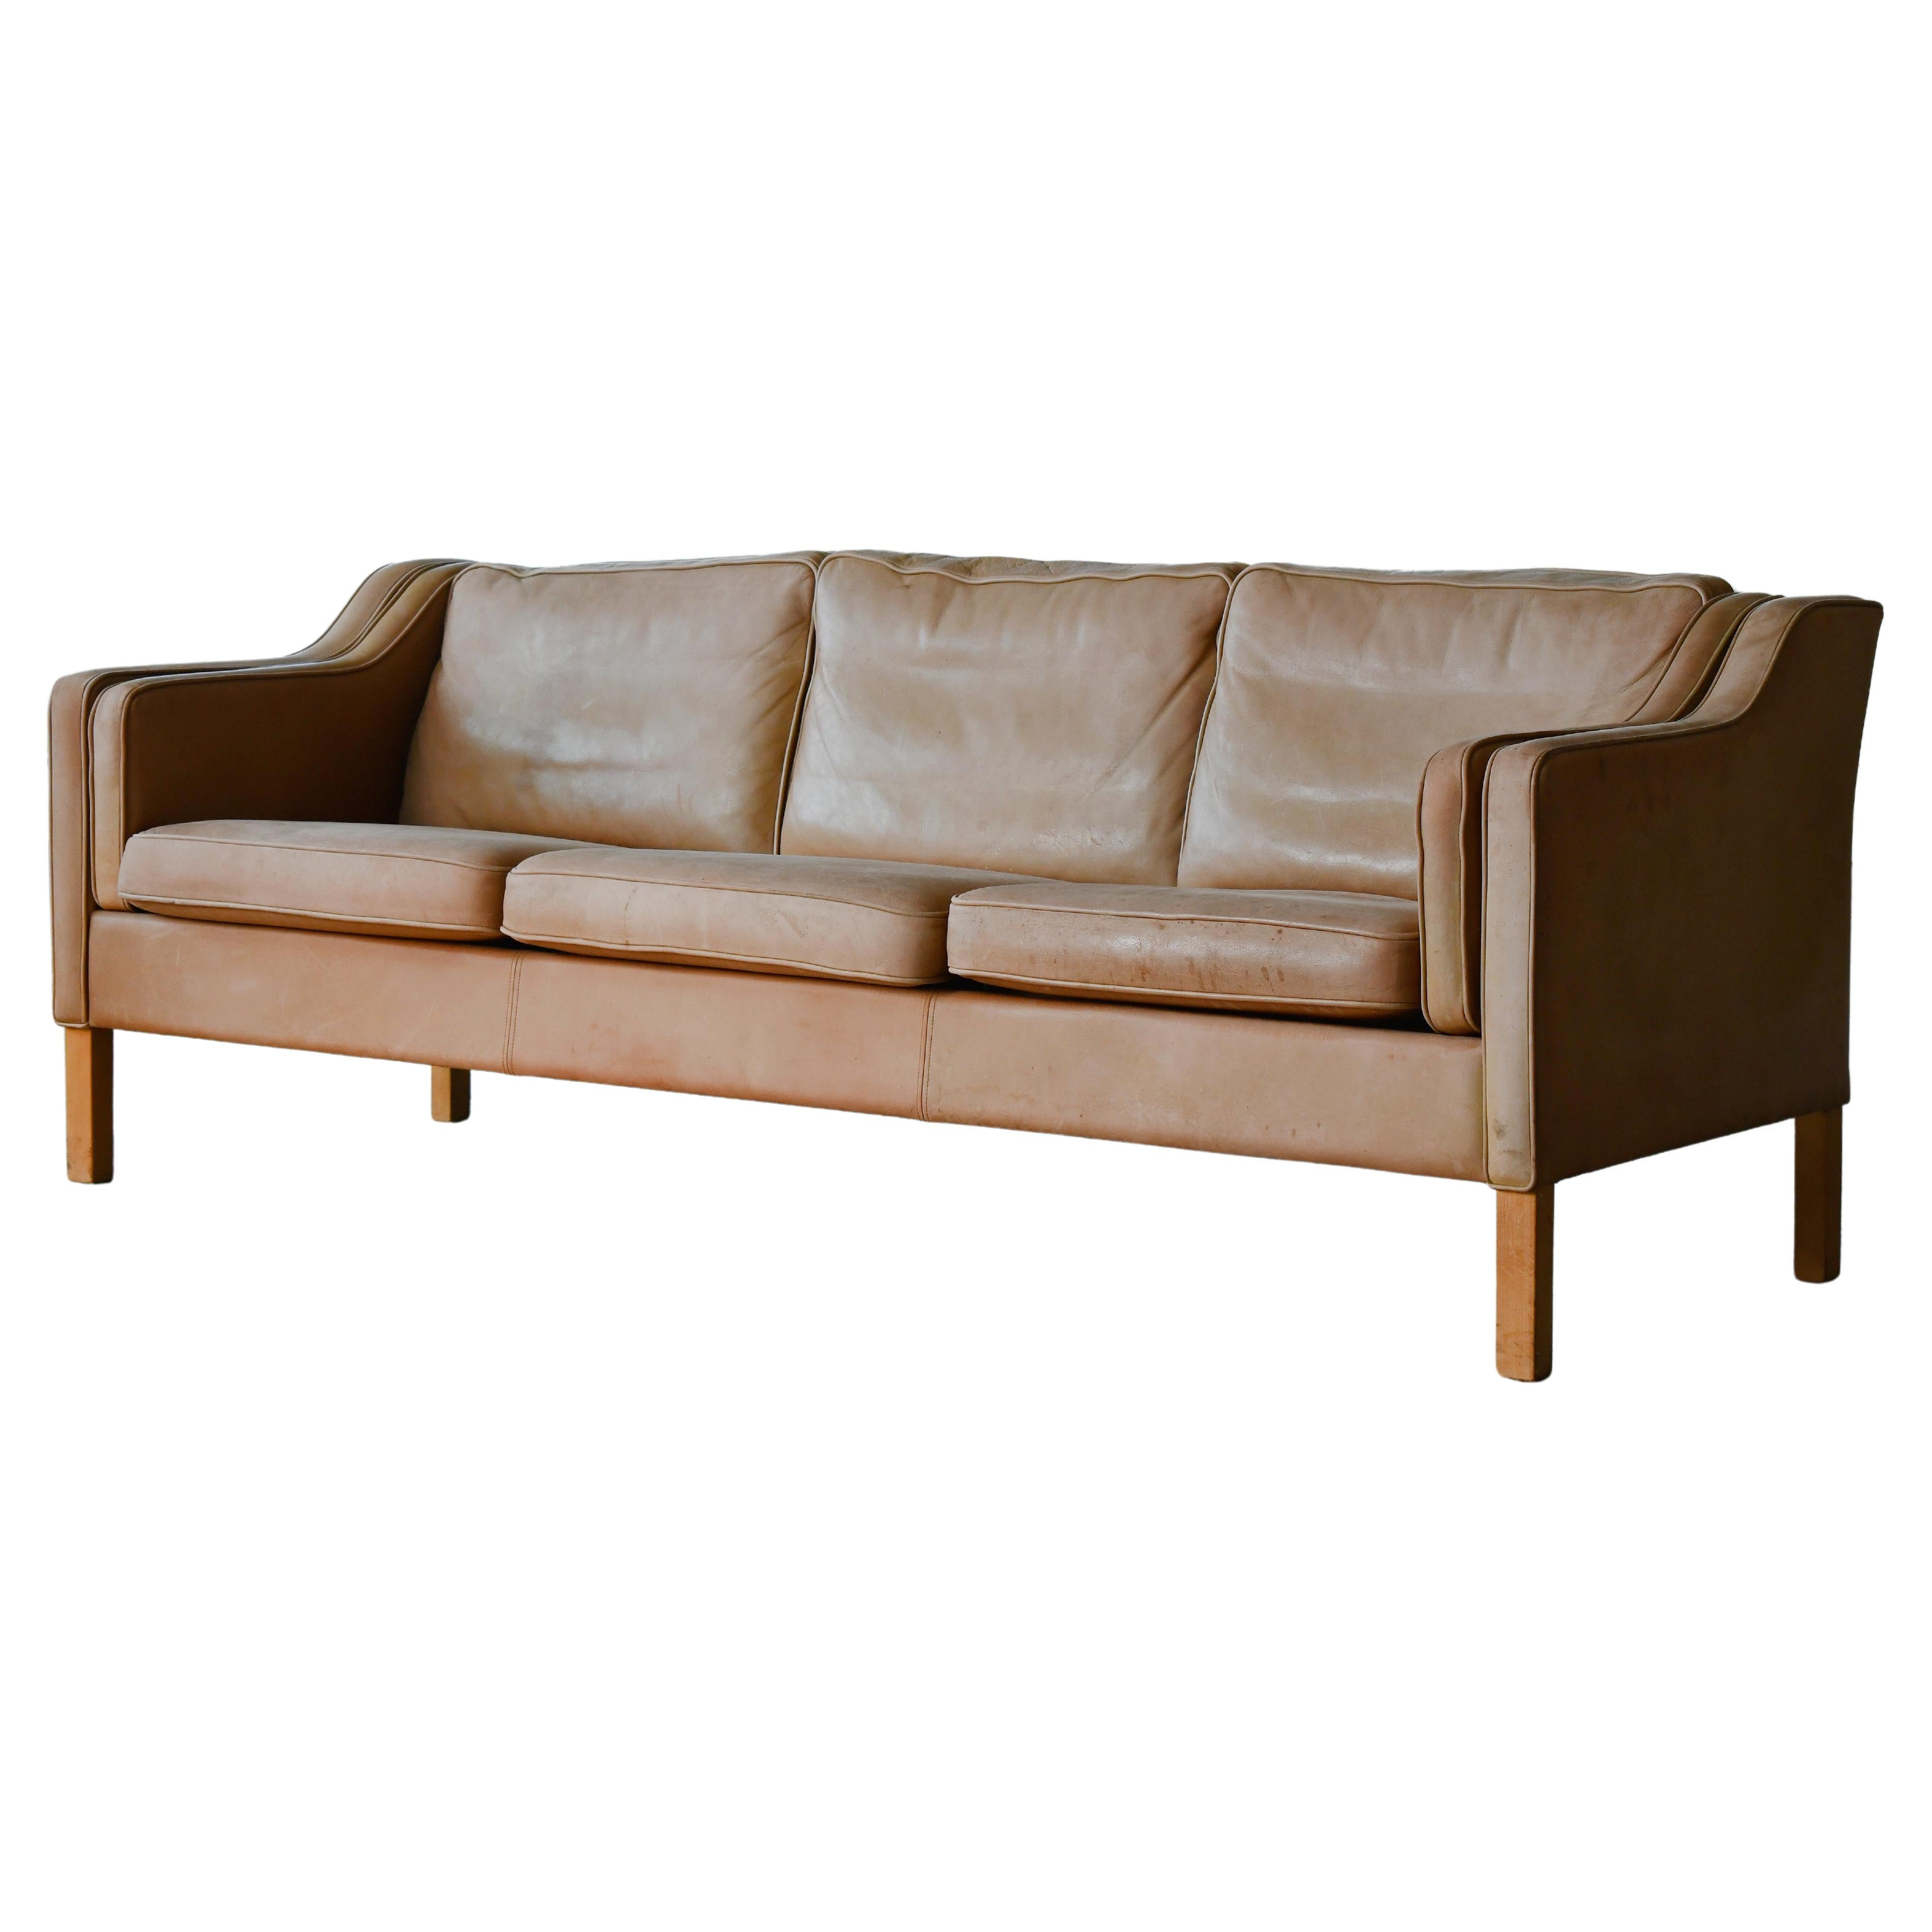 Borge Mogensen Style Model 2213 Three-Seat Sofa in Cream Leather by Stouby  For Sale